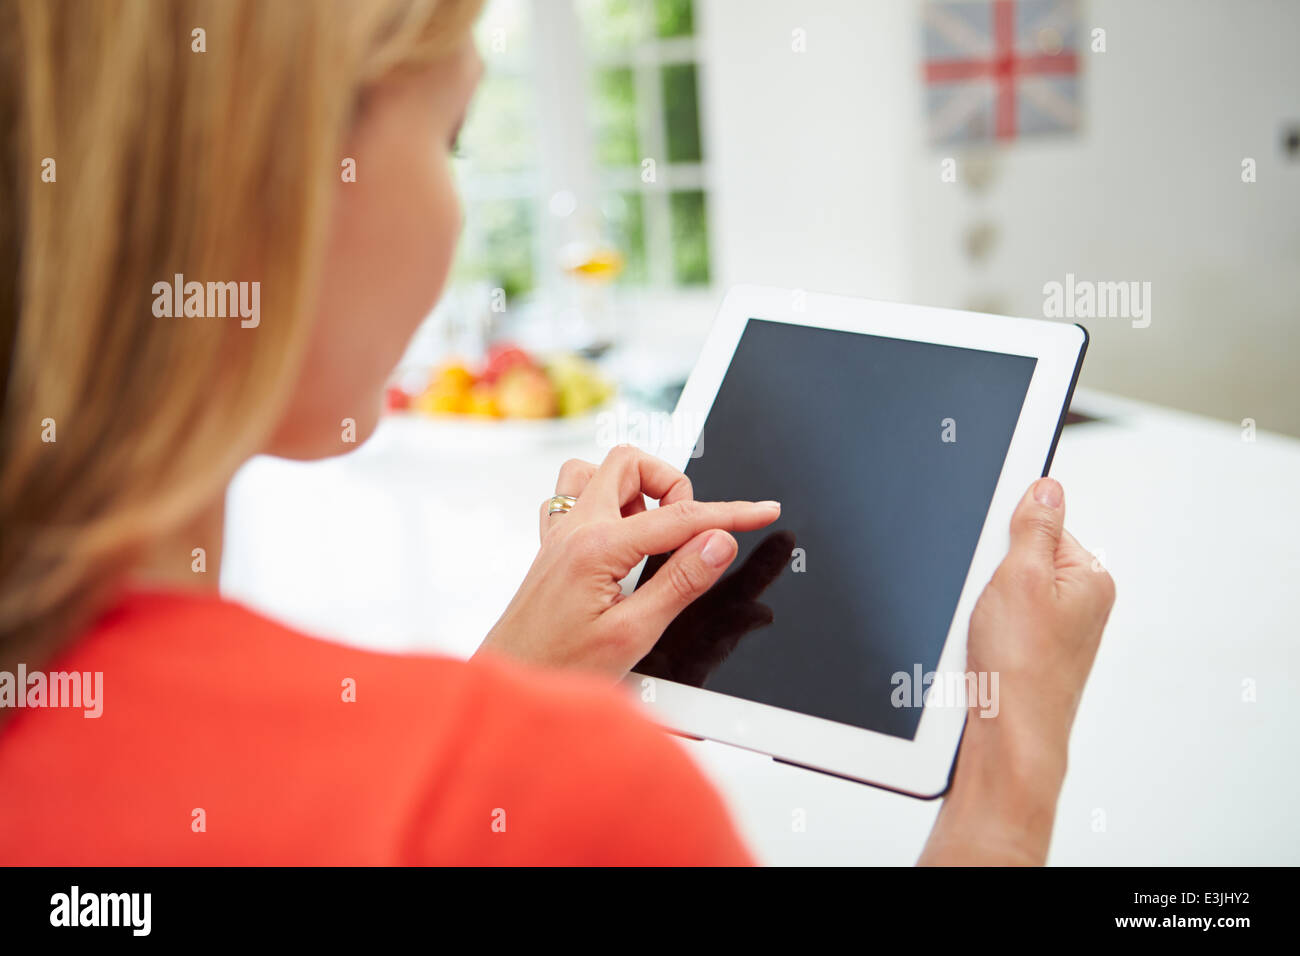 Woman Using Digital Tablet In Kitchen Banque D'Images